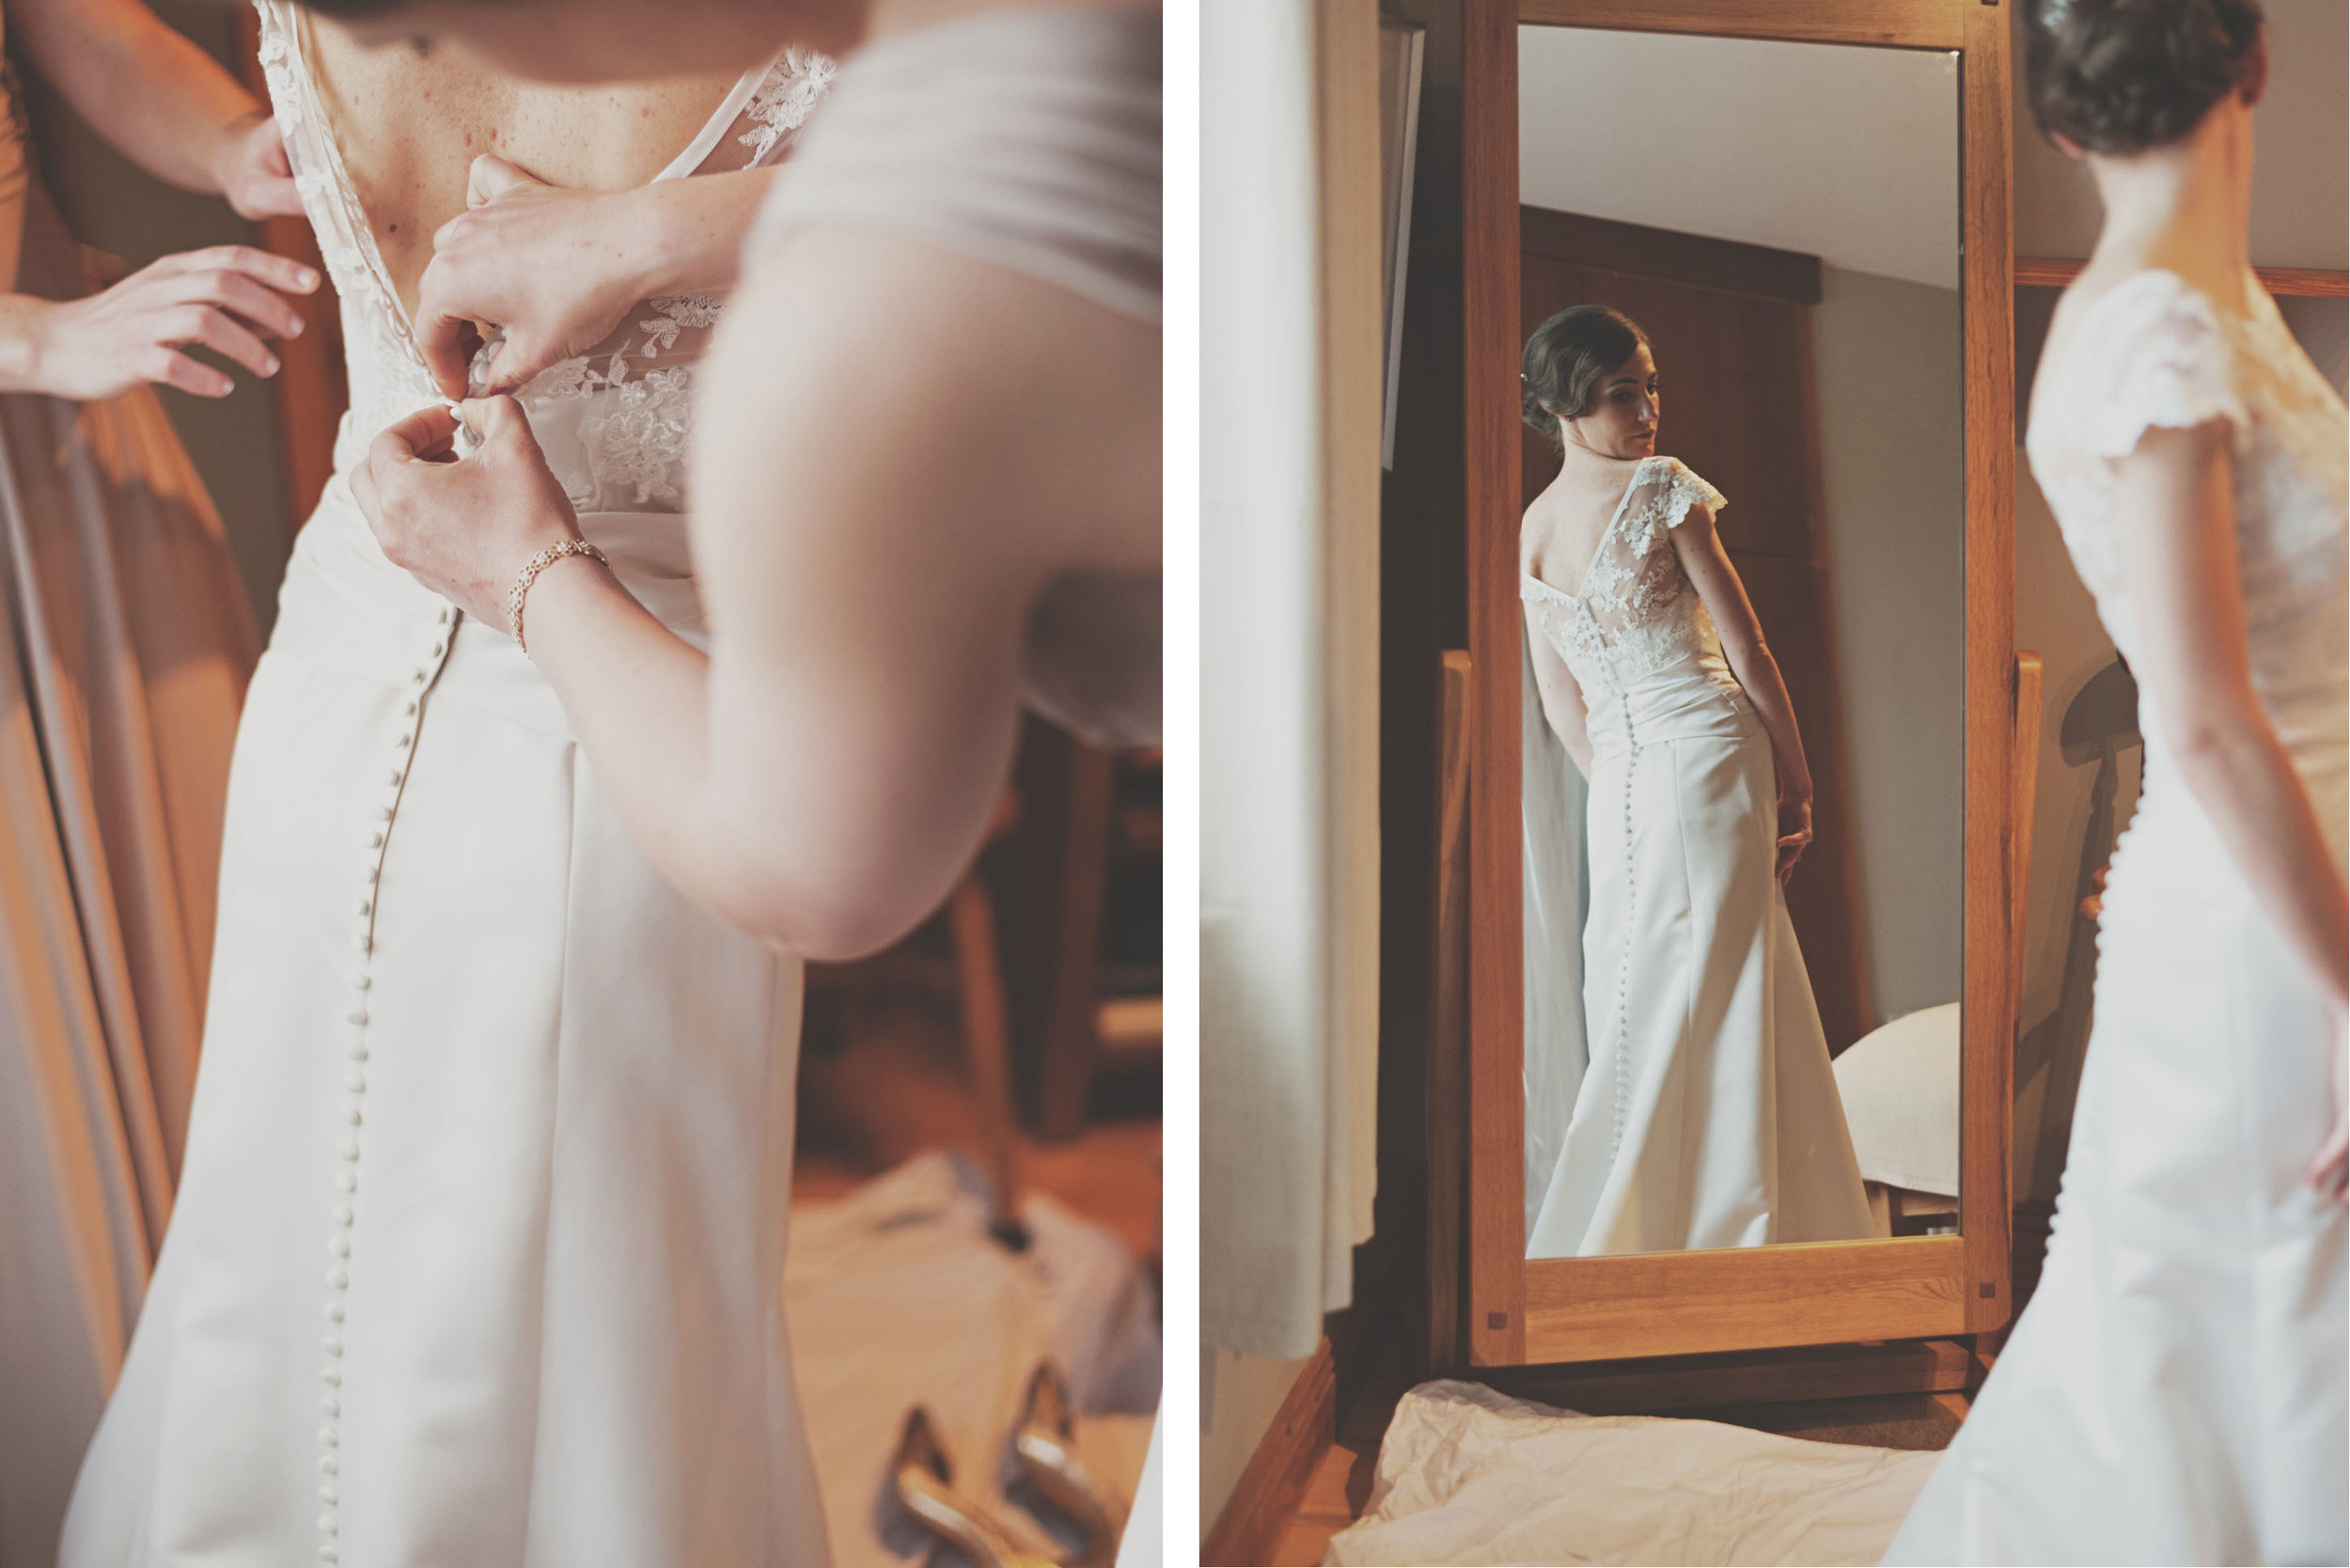 Brides dress at different angles